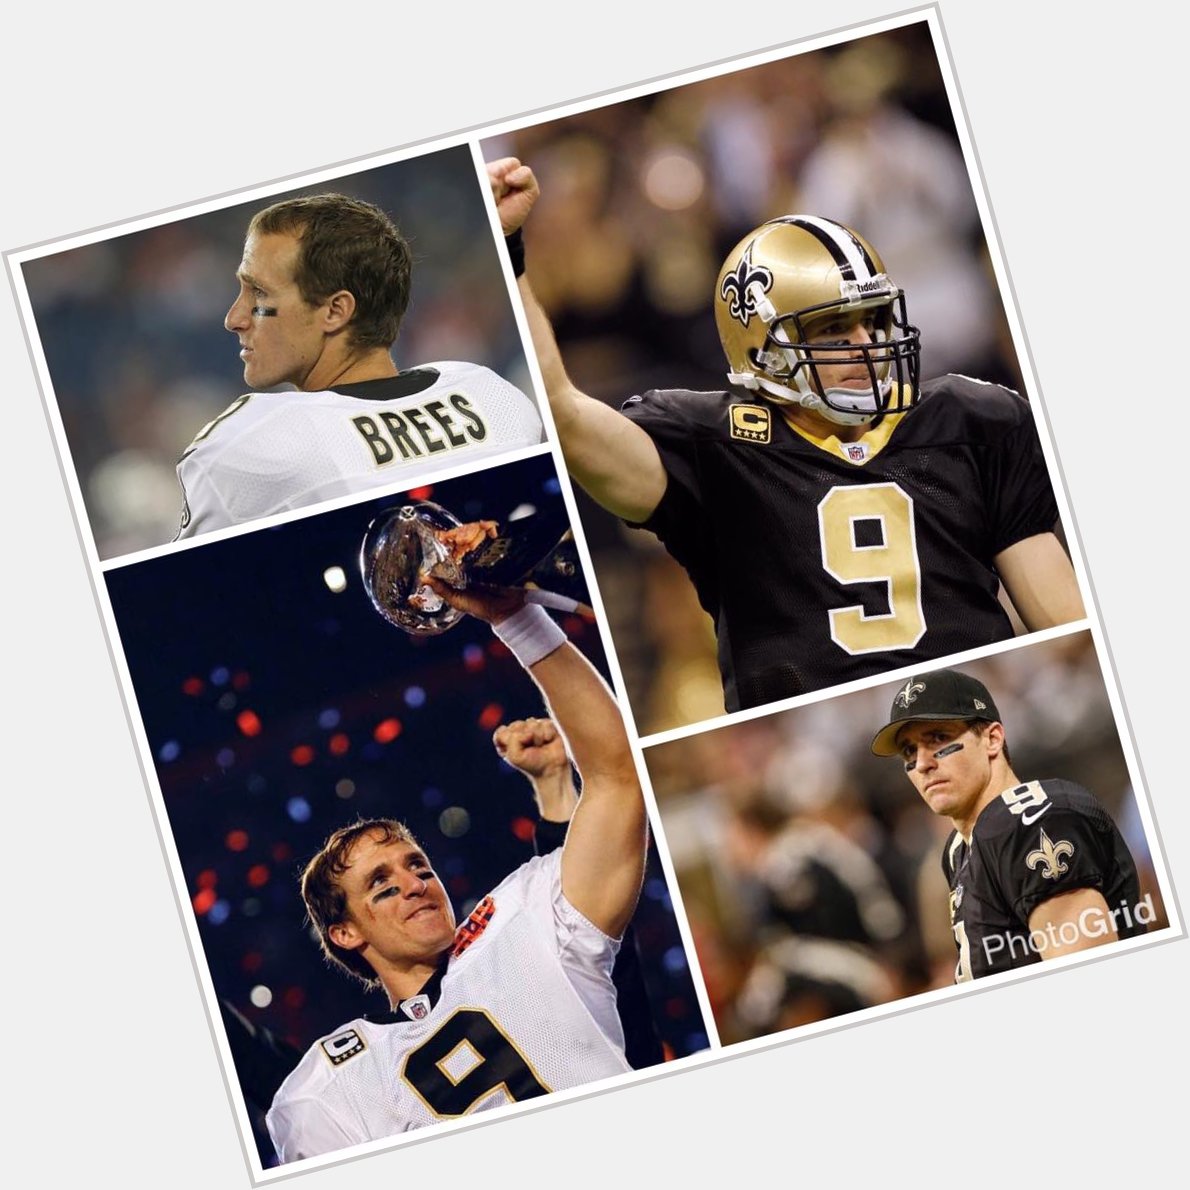 Happy 39th Birthday to my Quarterback! The incomparable Drew Brees 